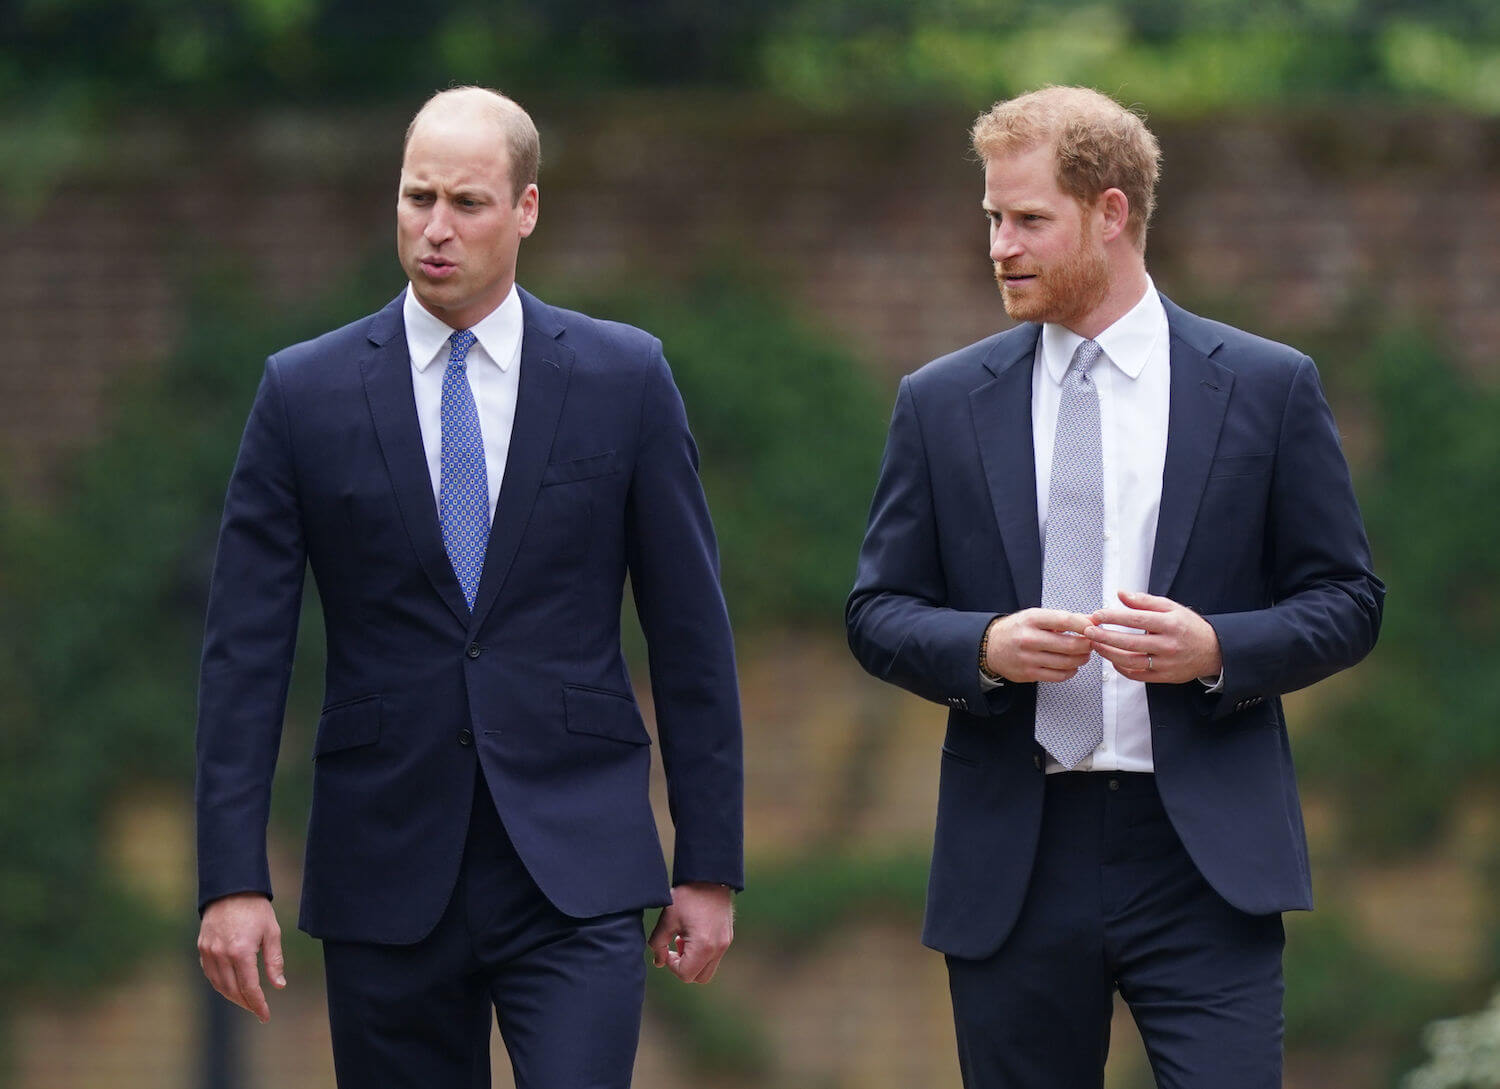 Prince William and Prince Harry walk and talk together, wearing dark suits